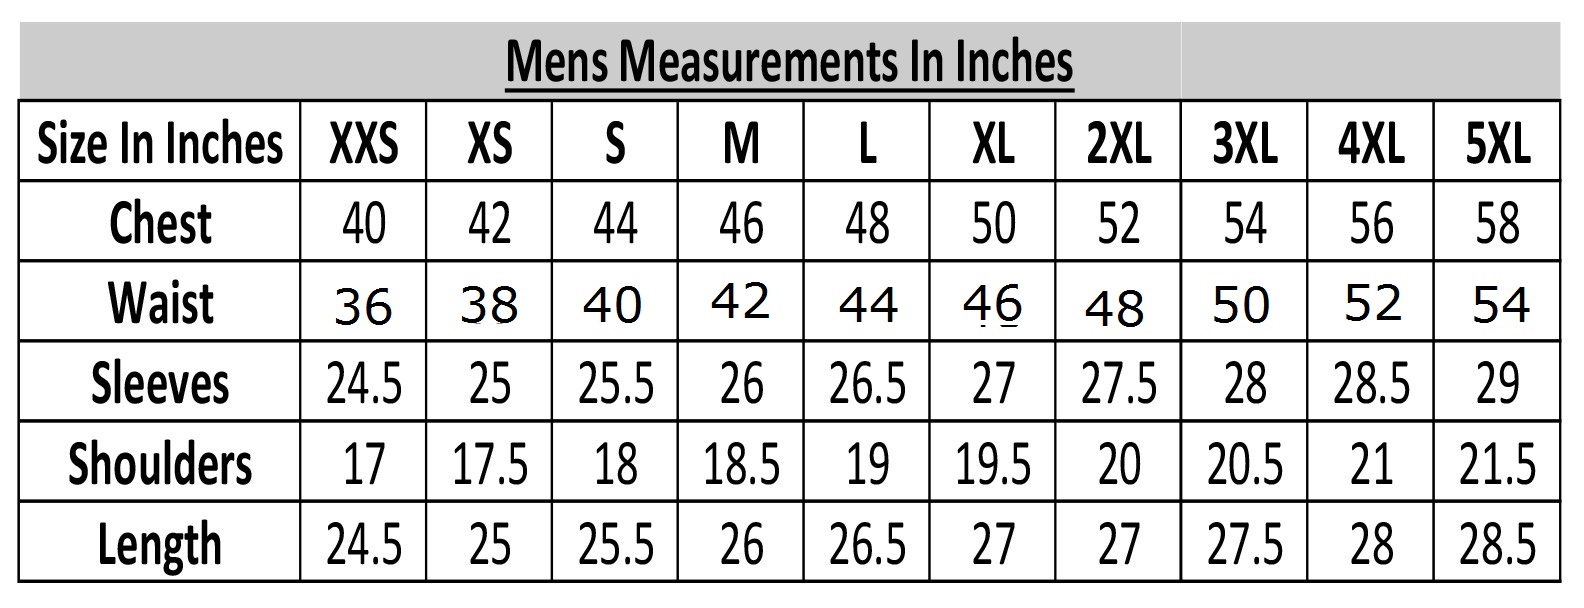 mens measurements in inches